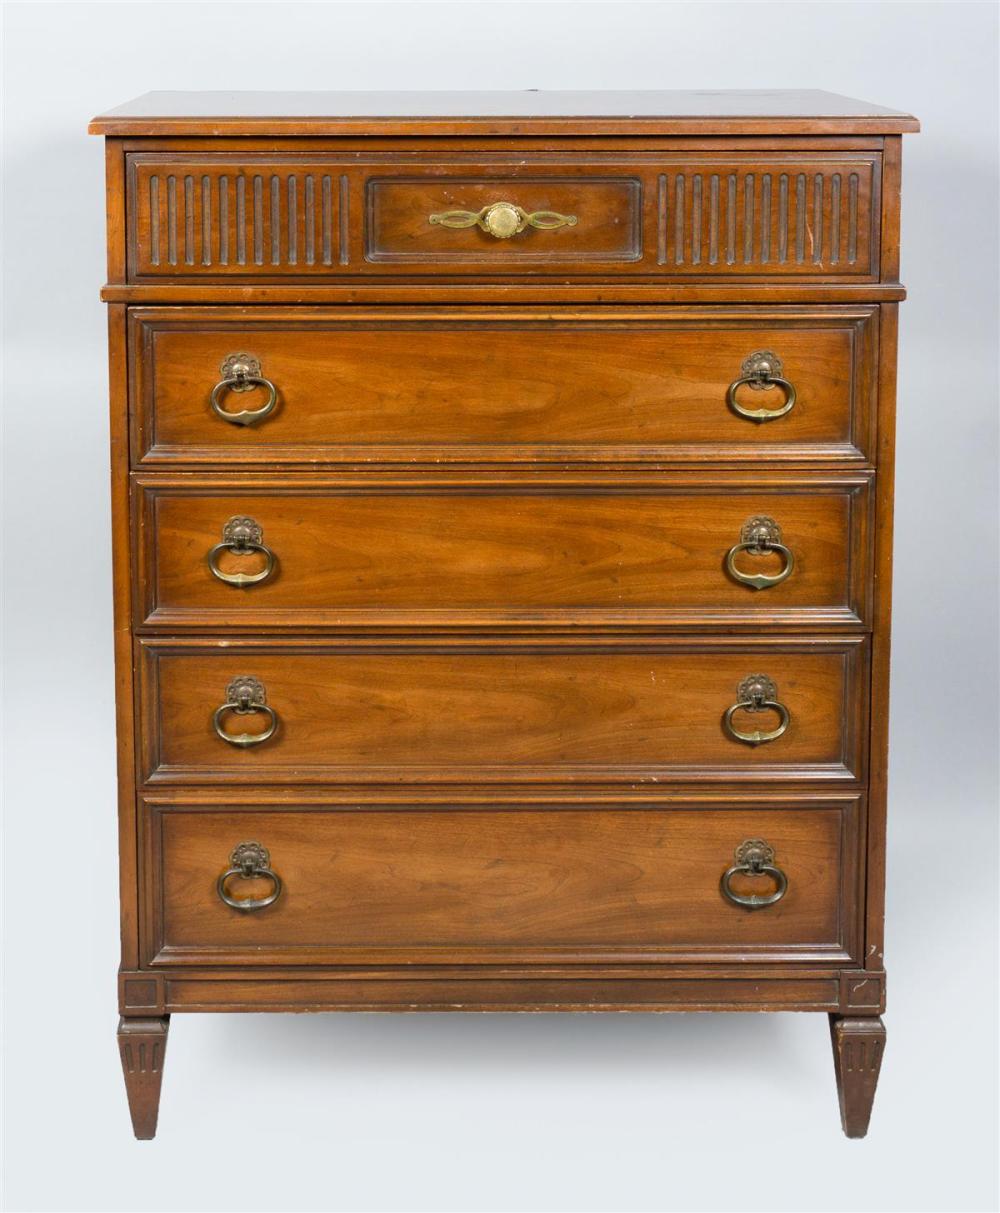 LOUIS XVI STYLE CHEST OF DRAWERSLOUIS